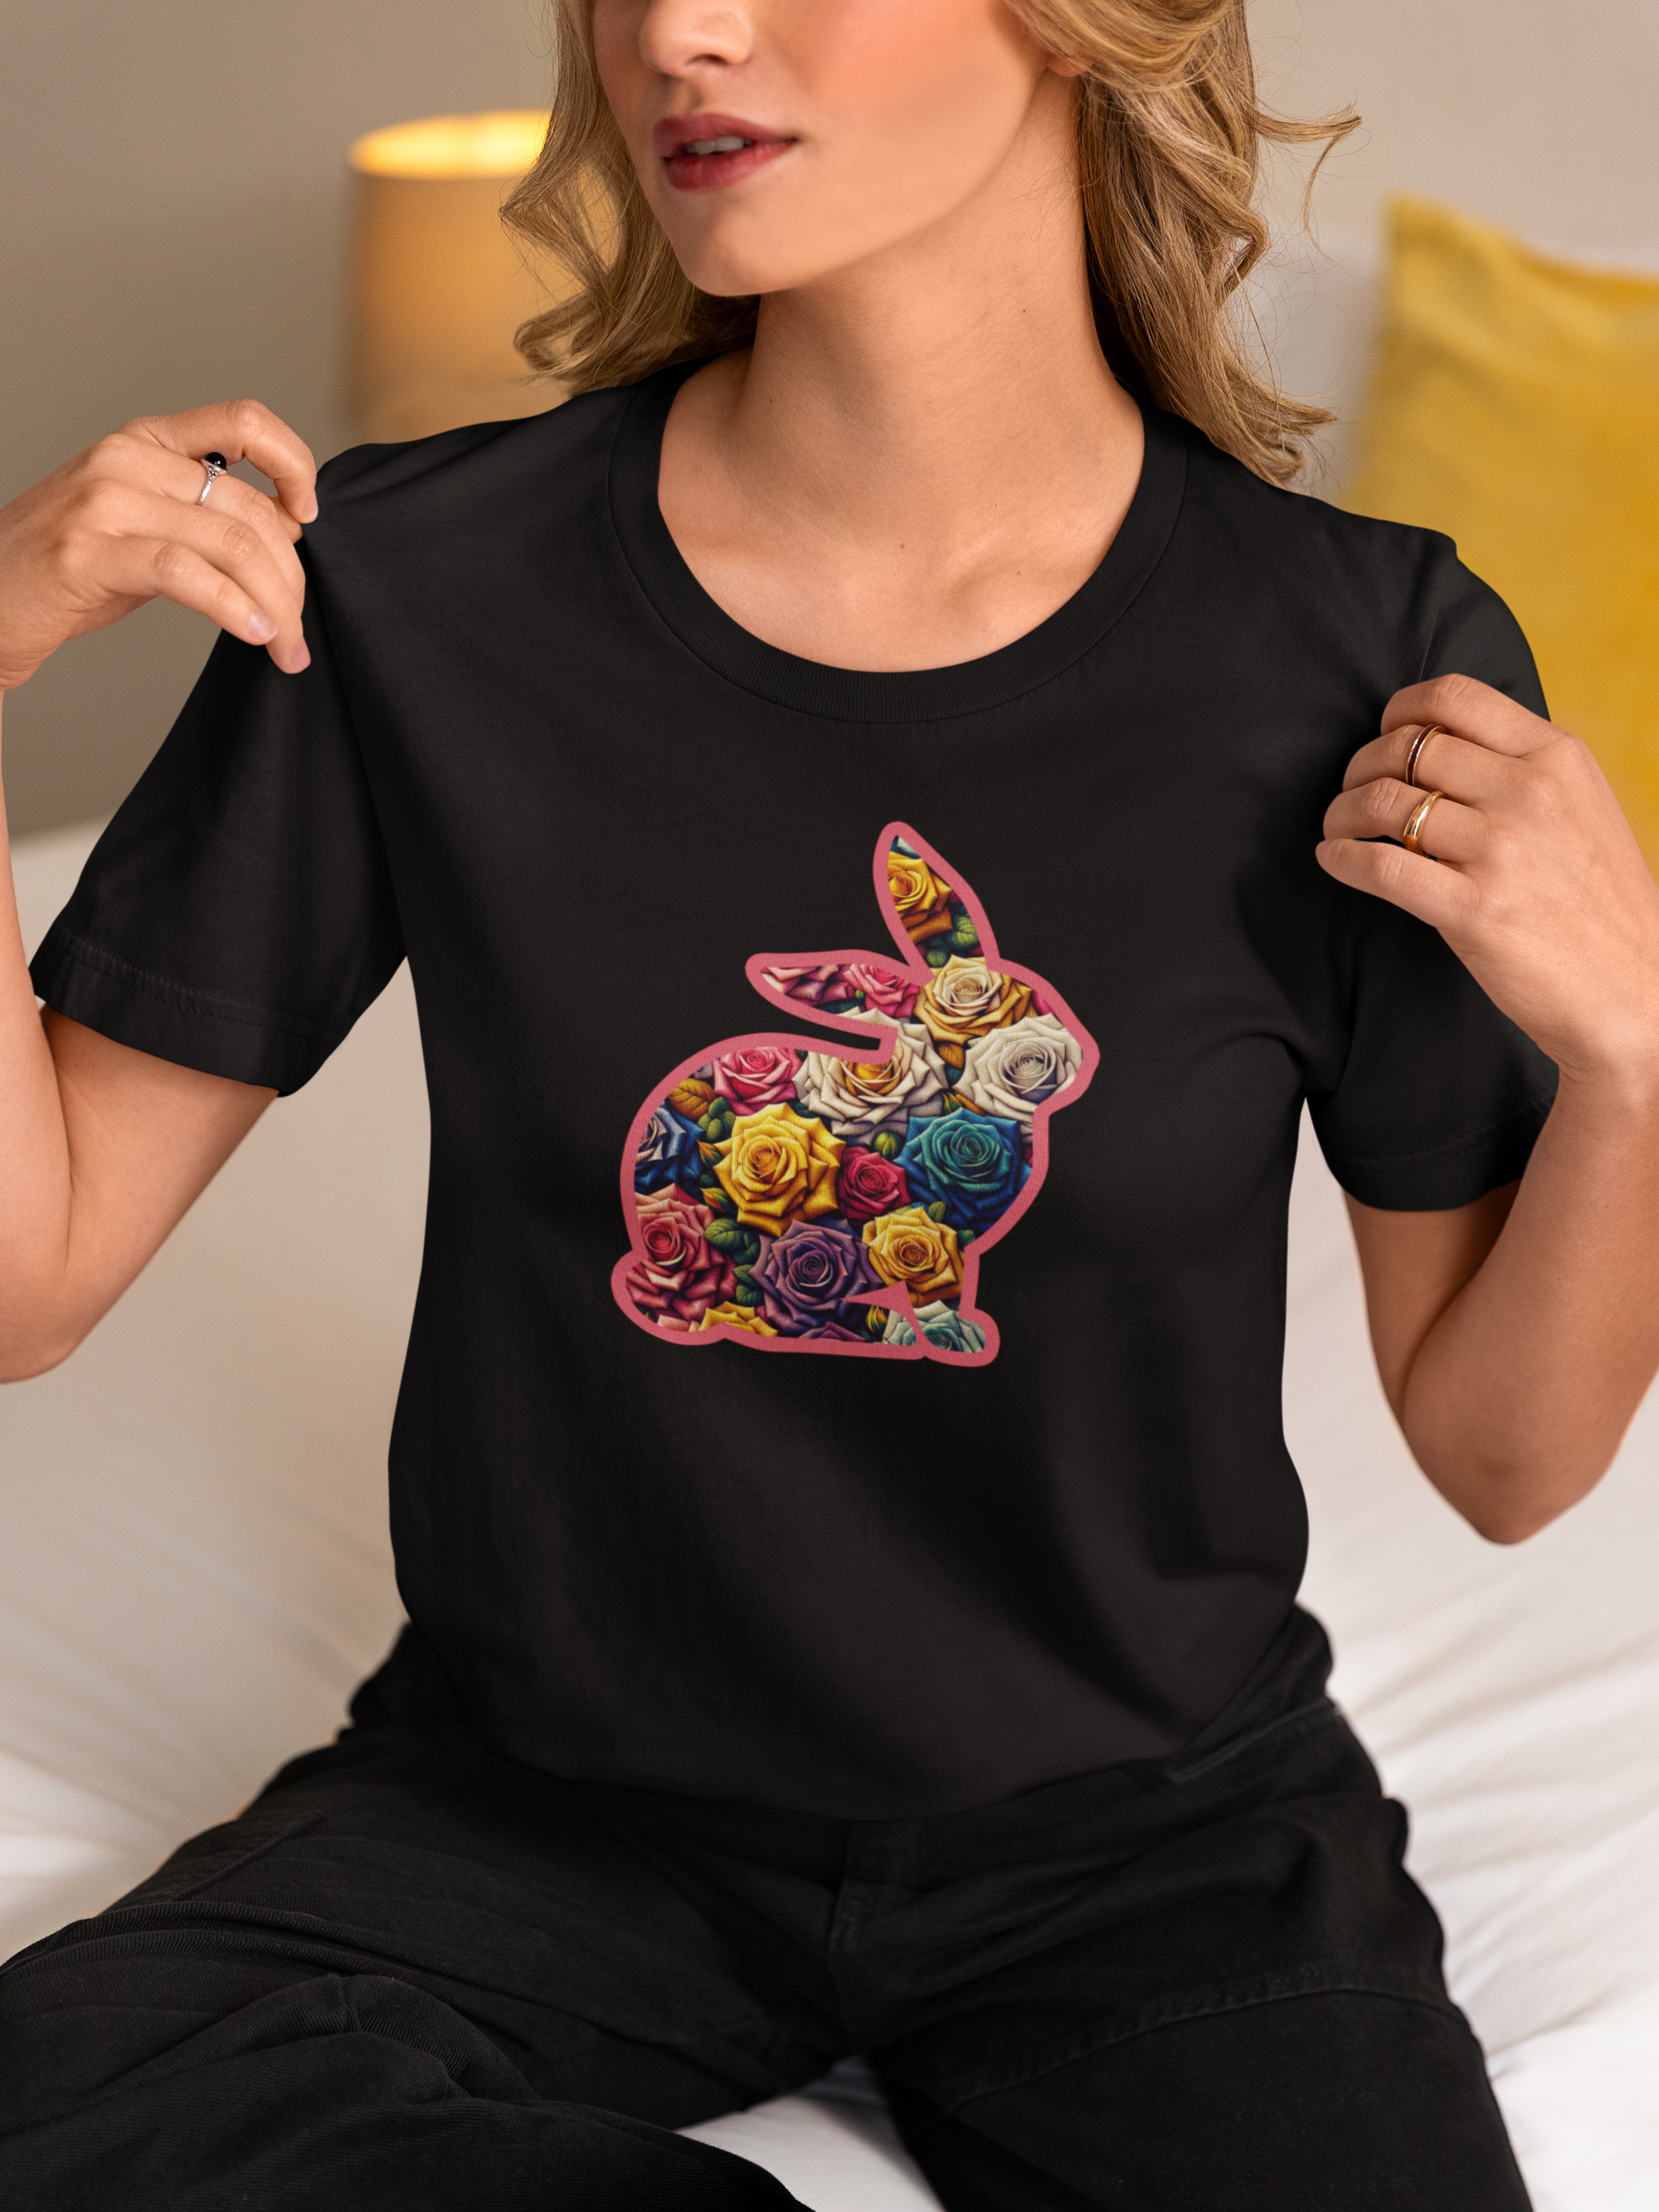 Easter Bunny Floral Multicolored Roses T-Shirt - Women's Easter Tee